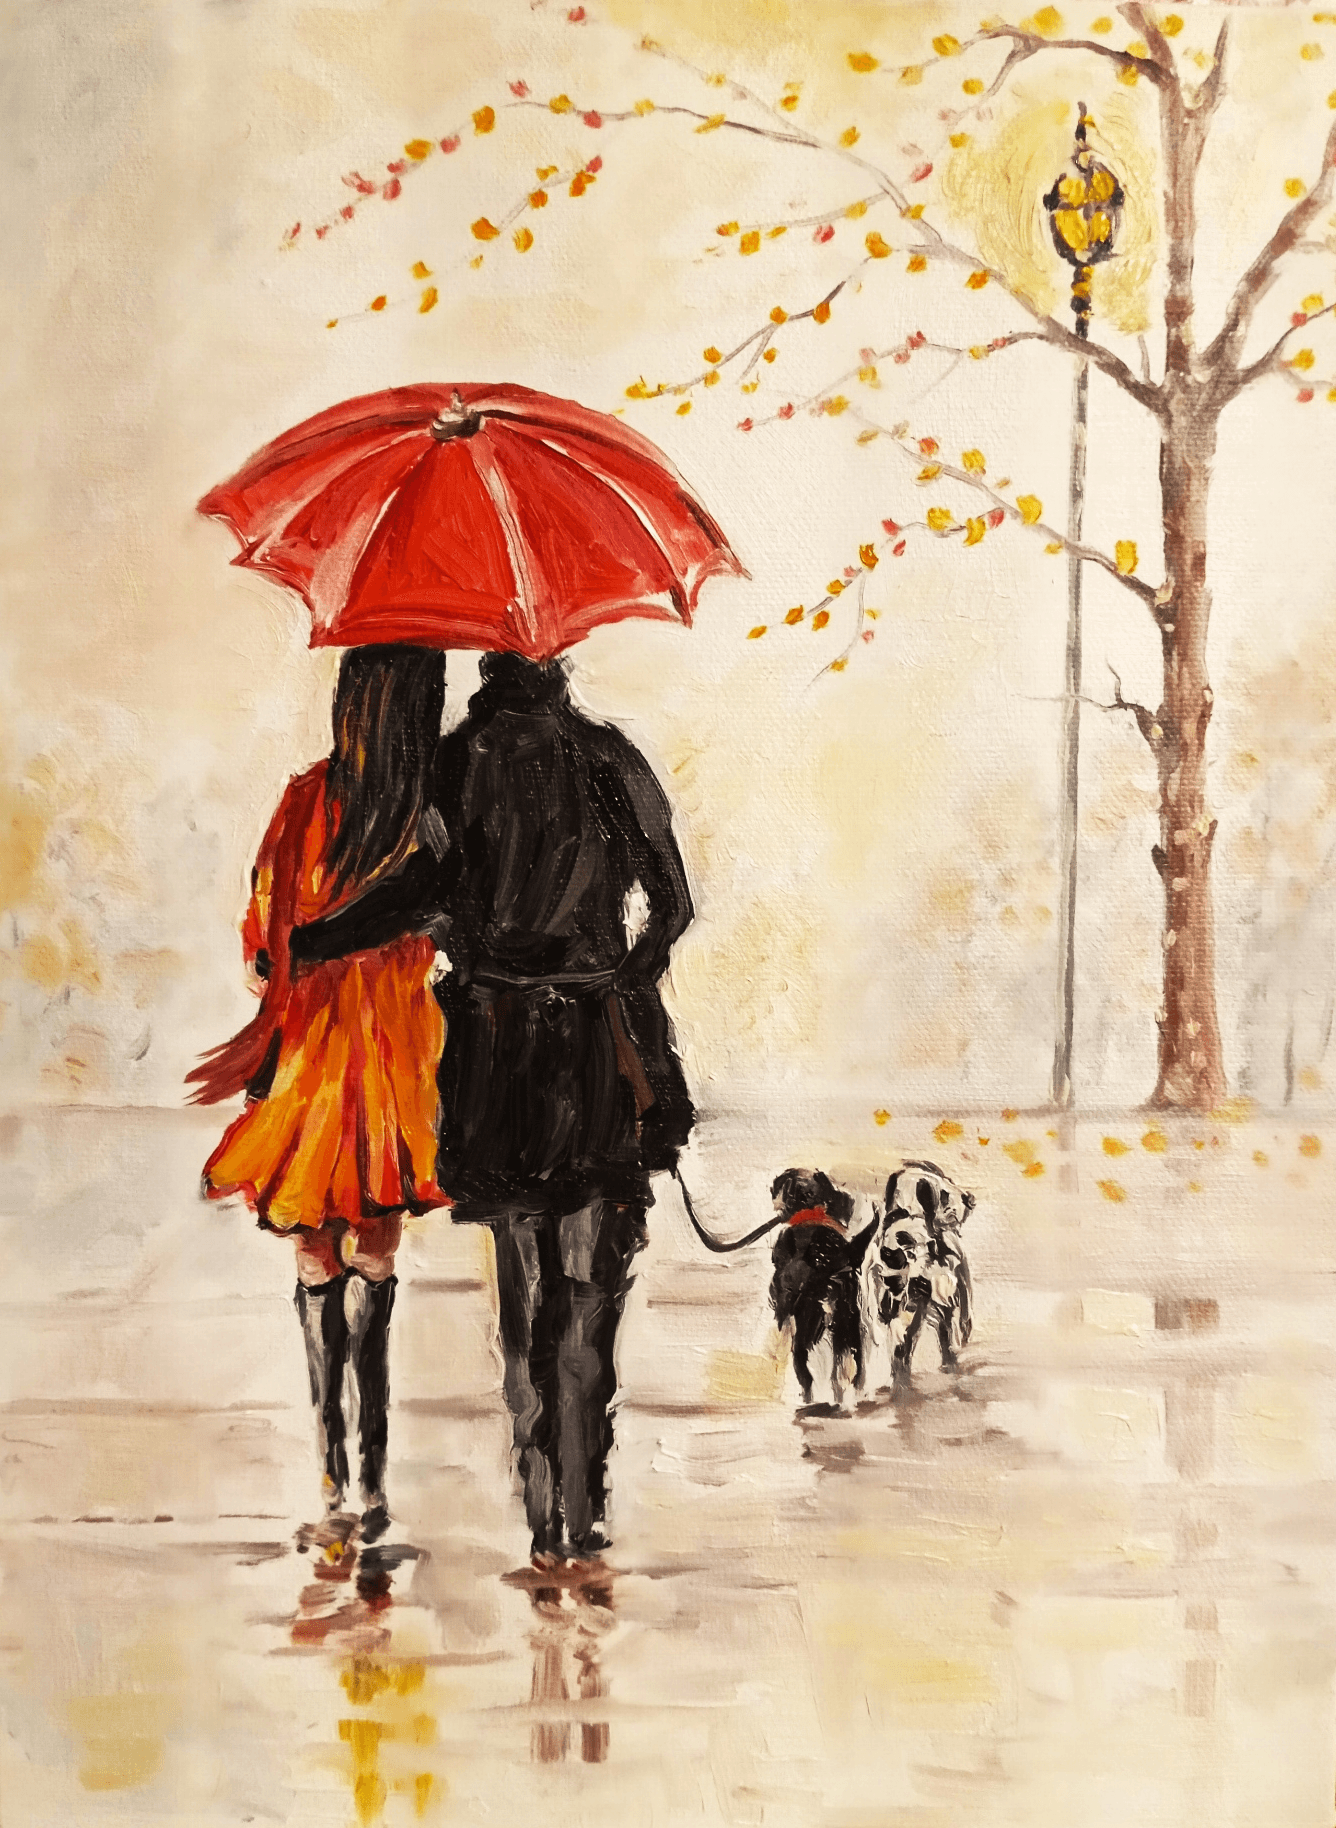 Lovers in a rainy Day